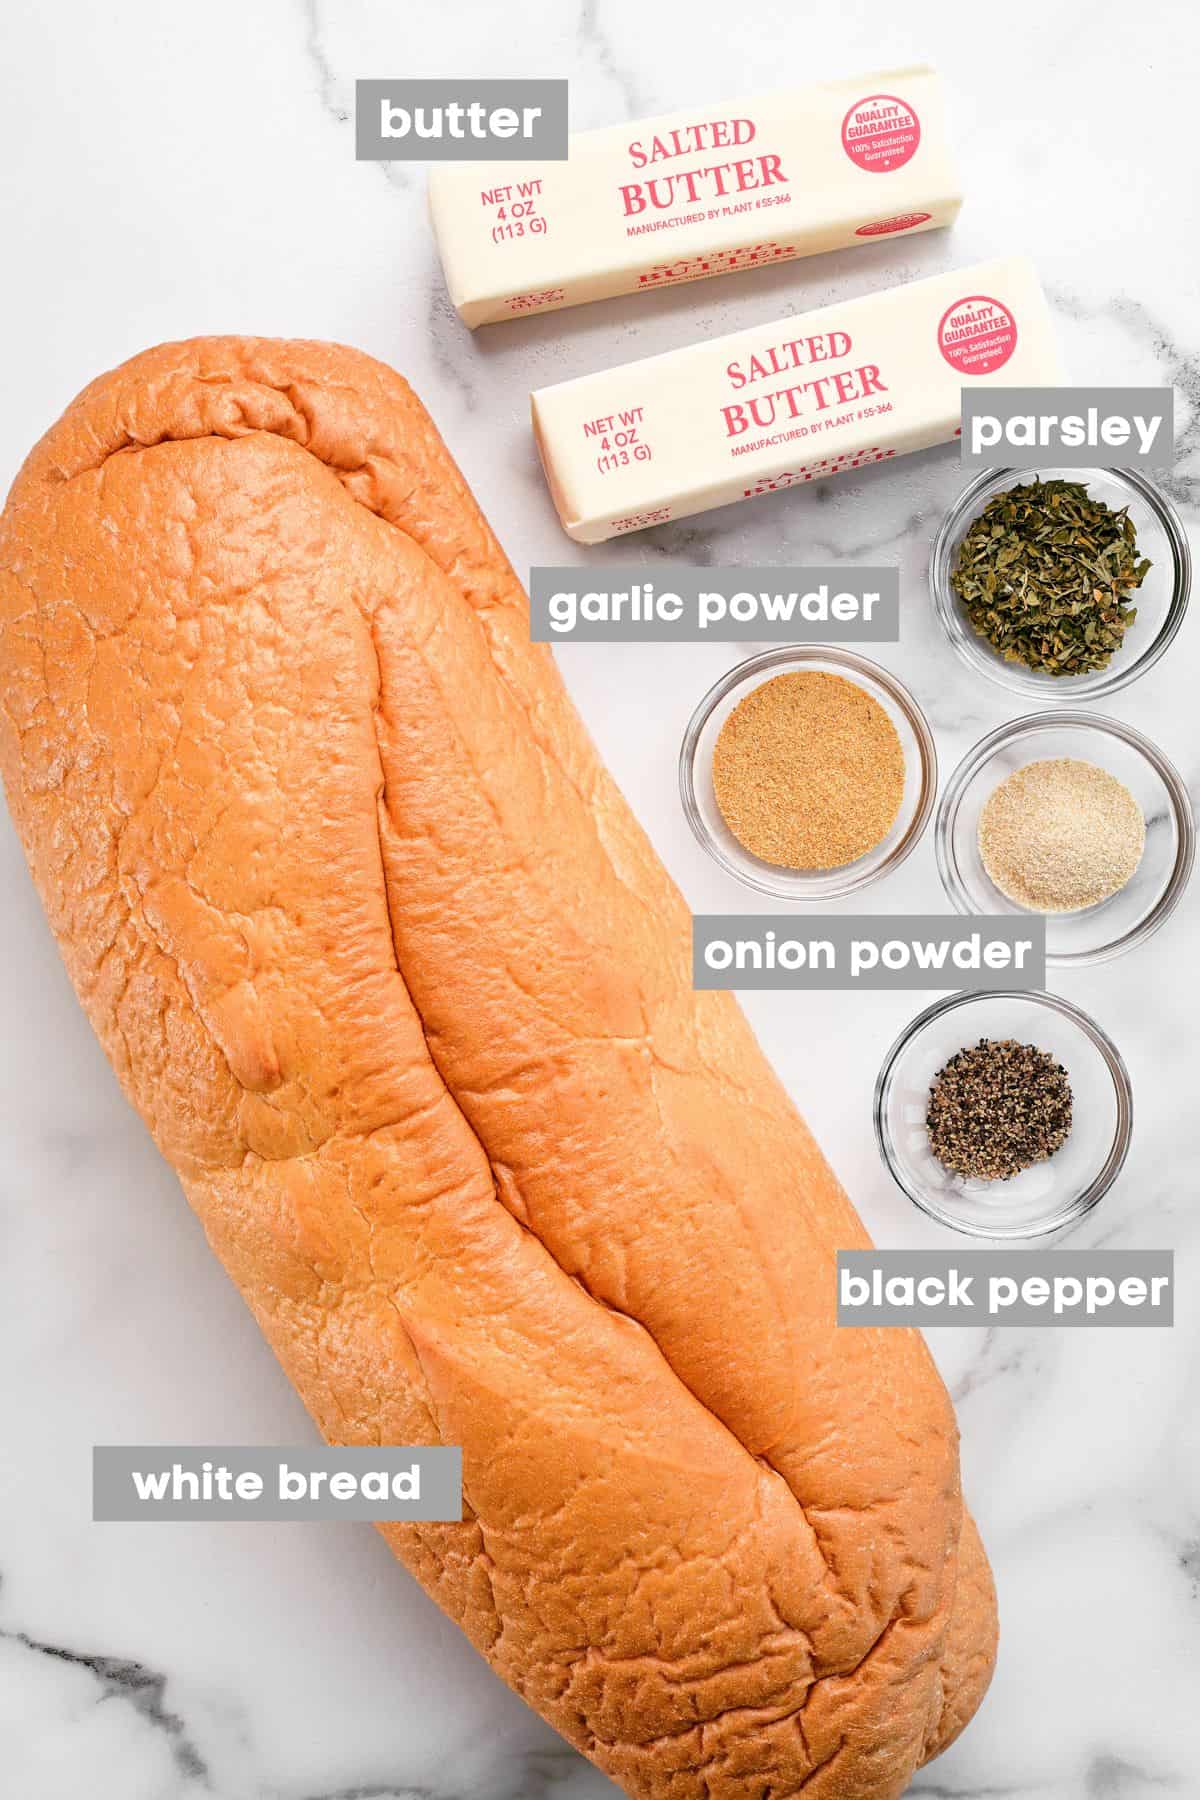 Bread and other ingredients on a white marble countertop.